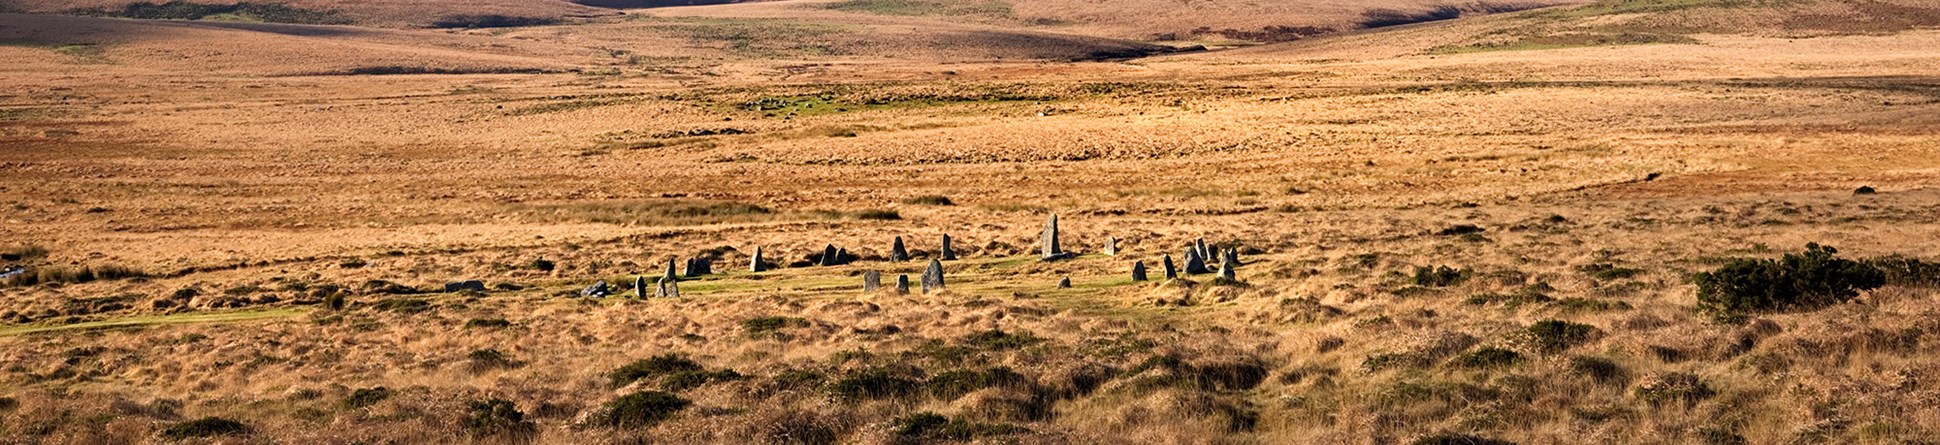 A stone circle in a wide open landscape.